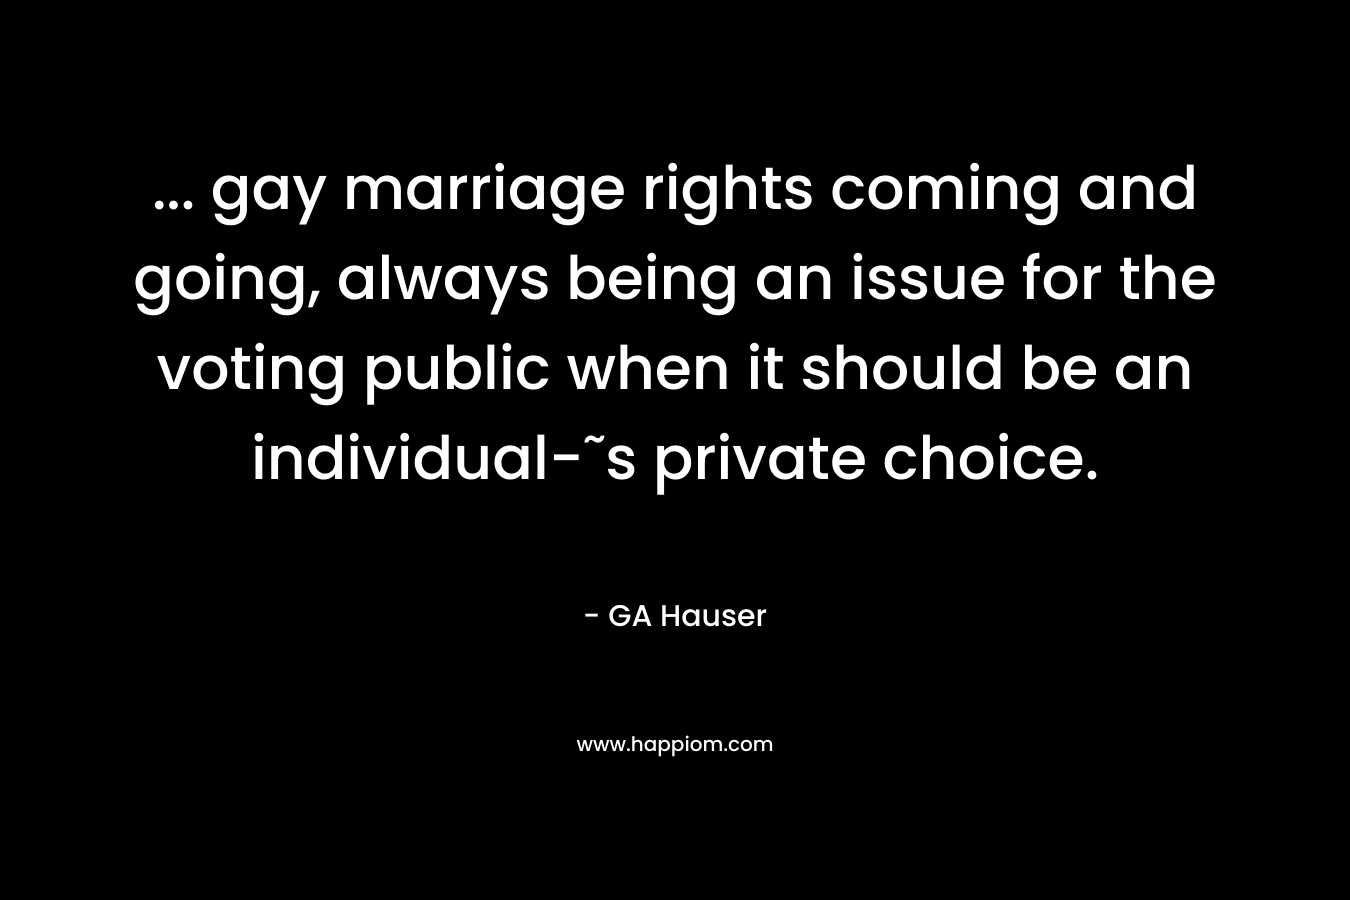 … gay marriage rights coming and going, always being an issue for the voting public when it should be an individual-˜s private choice. – GA Hauser